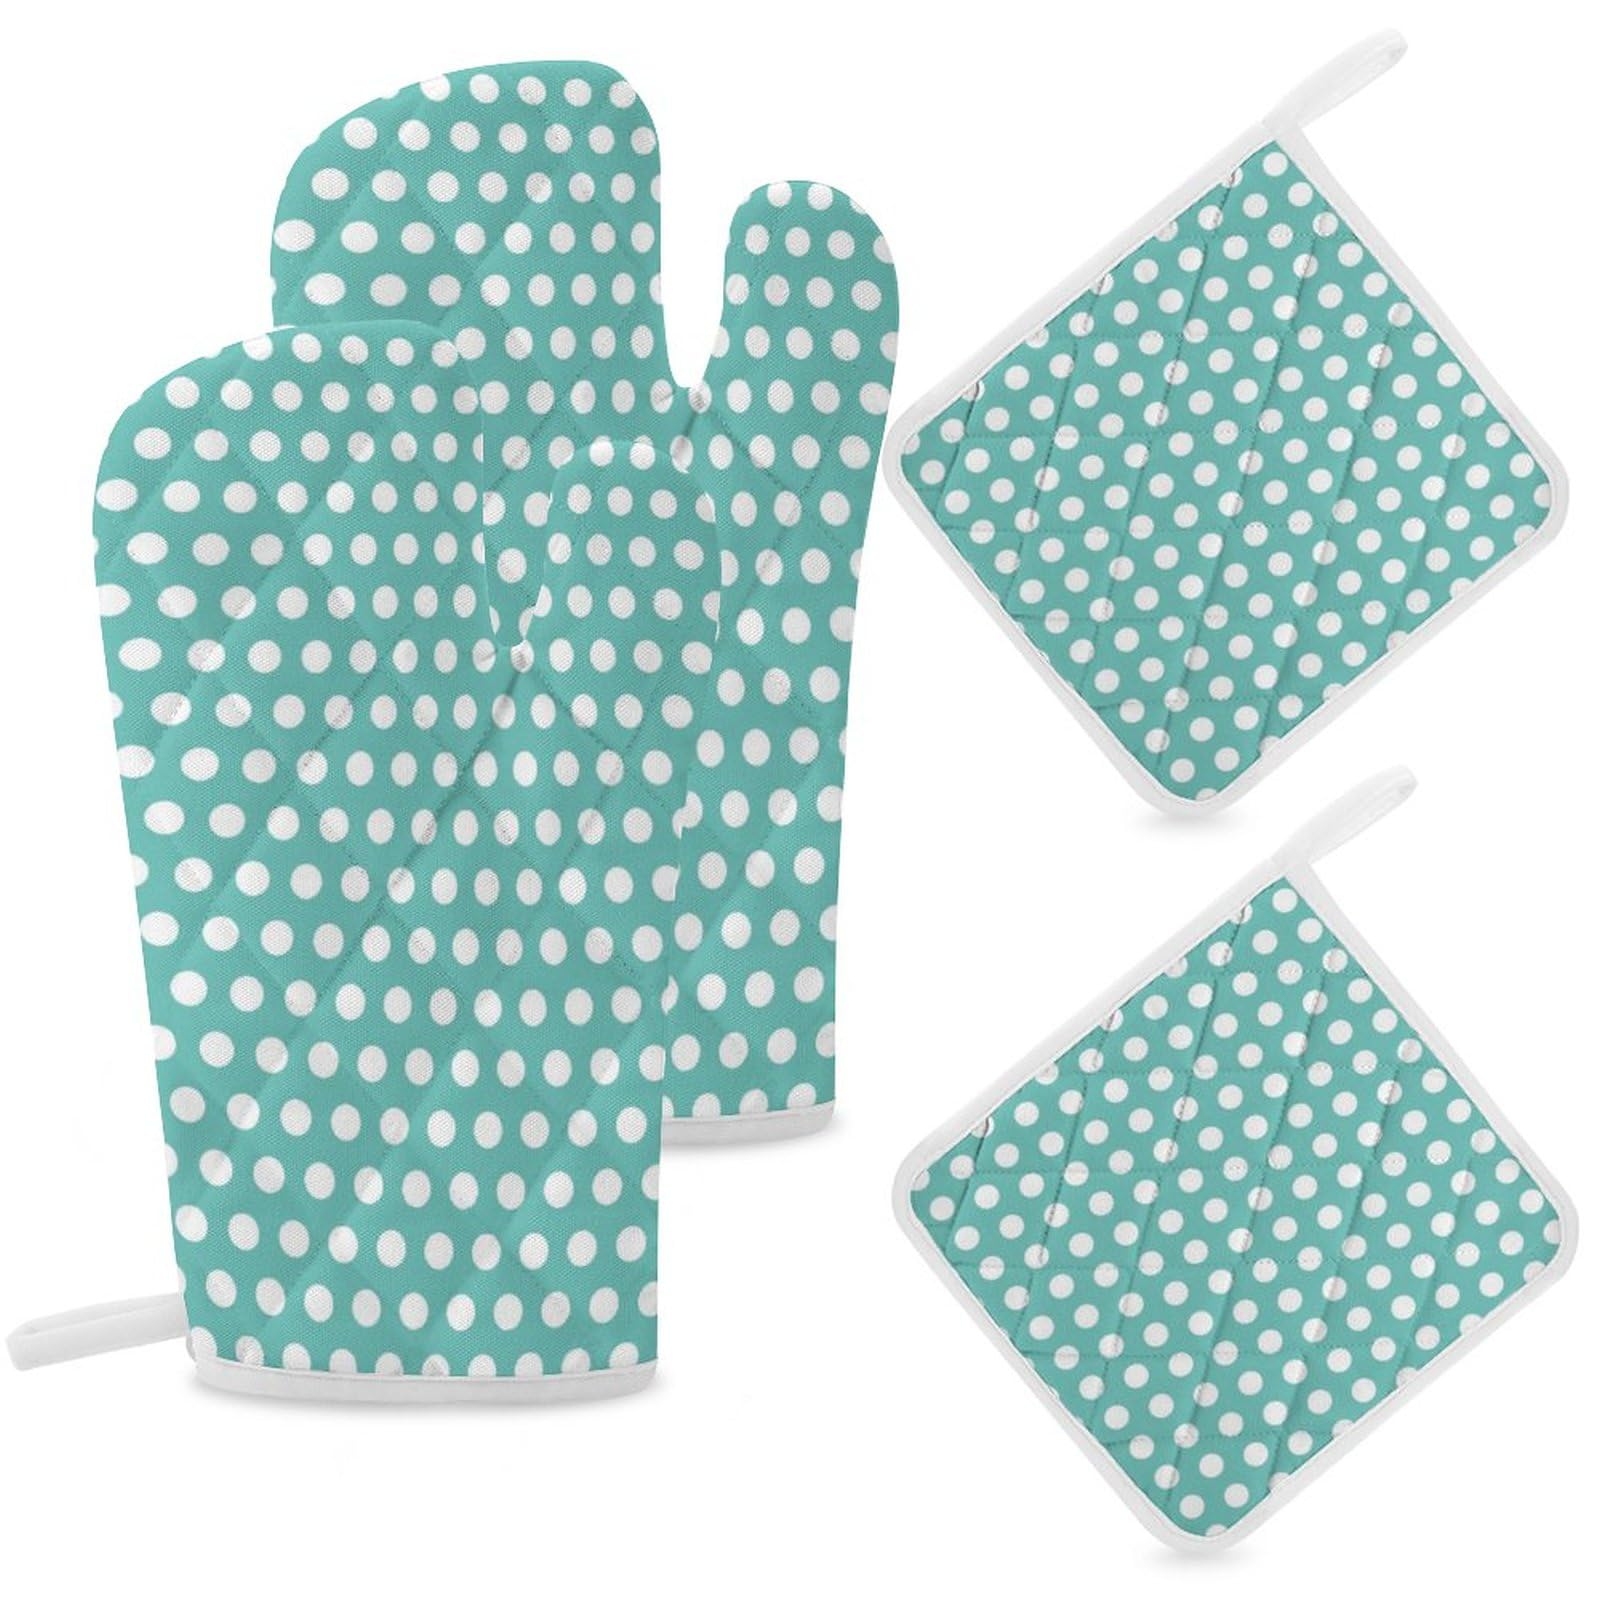 4PCS Oven Mitts and Pot Holders Sets, Polka Dots White Aqua Oven Mitts Set Heat Resistant Kitchen Microwave Gloves Safe for Baking,Cooking, BBQ